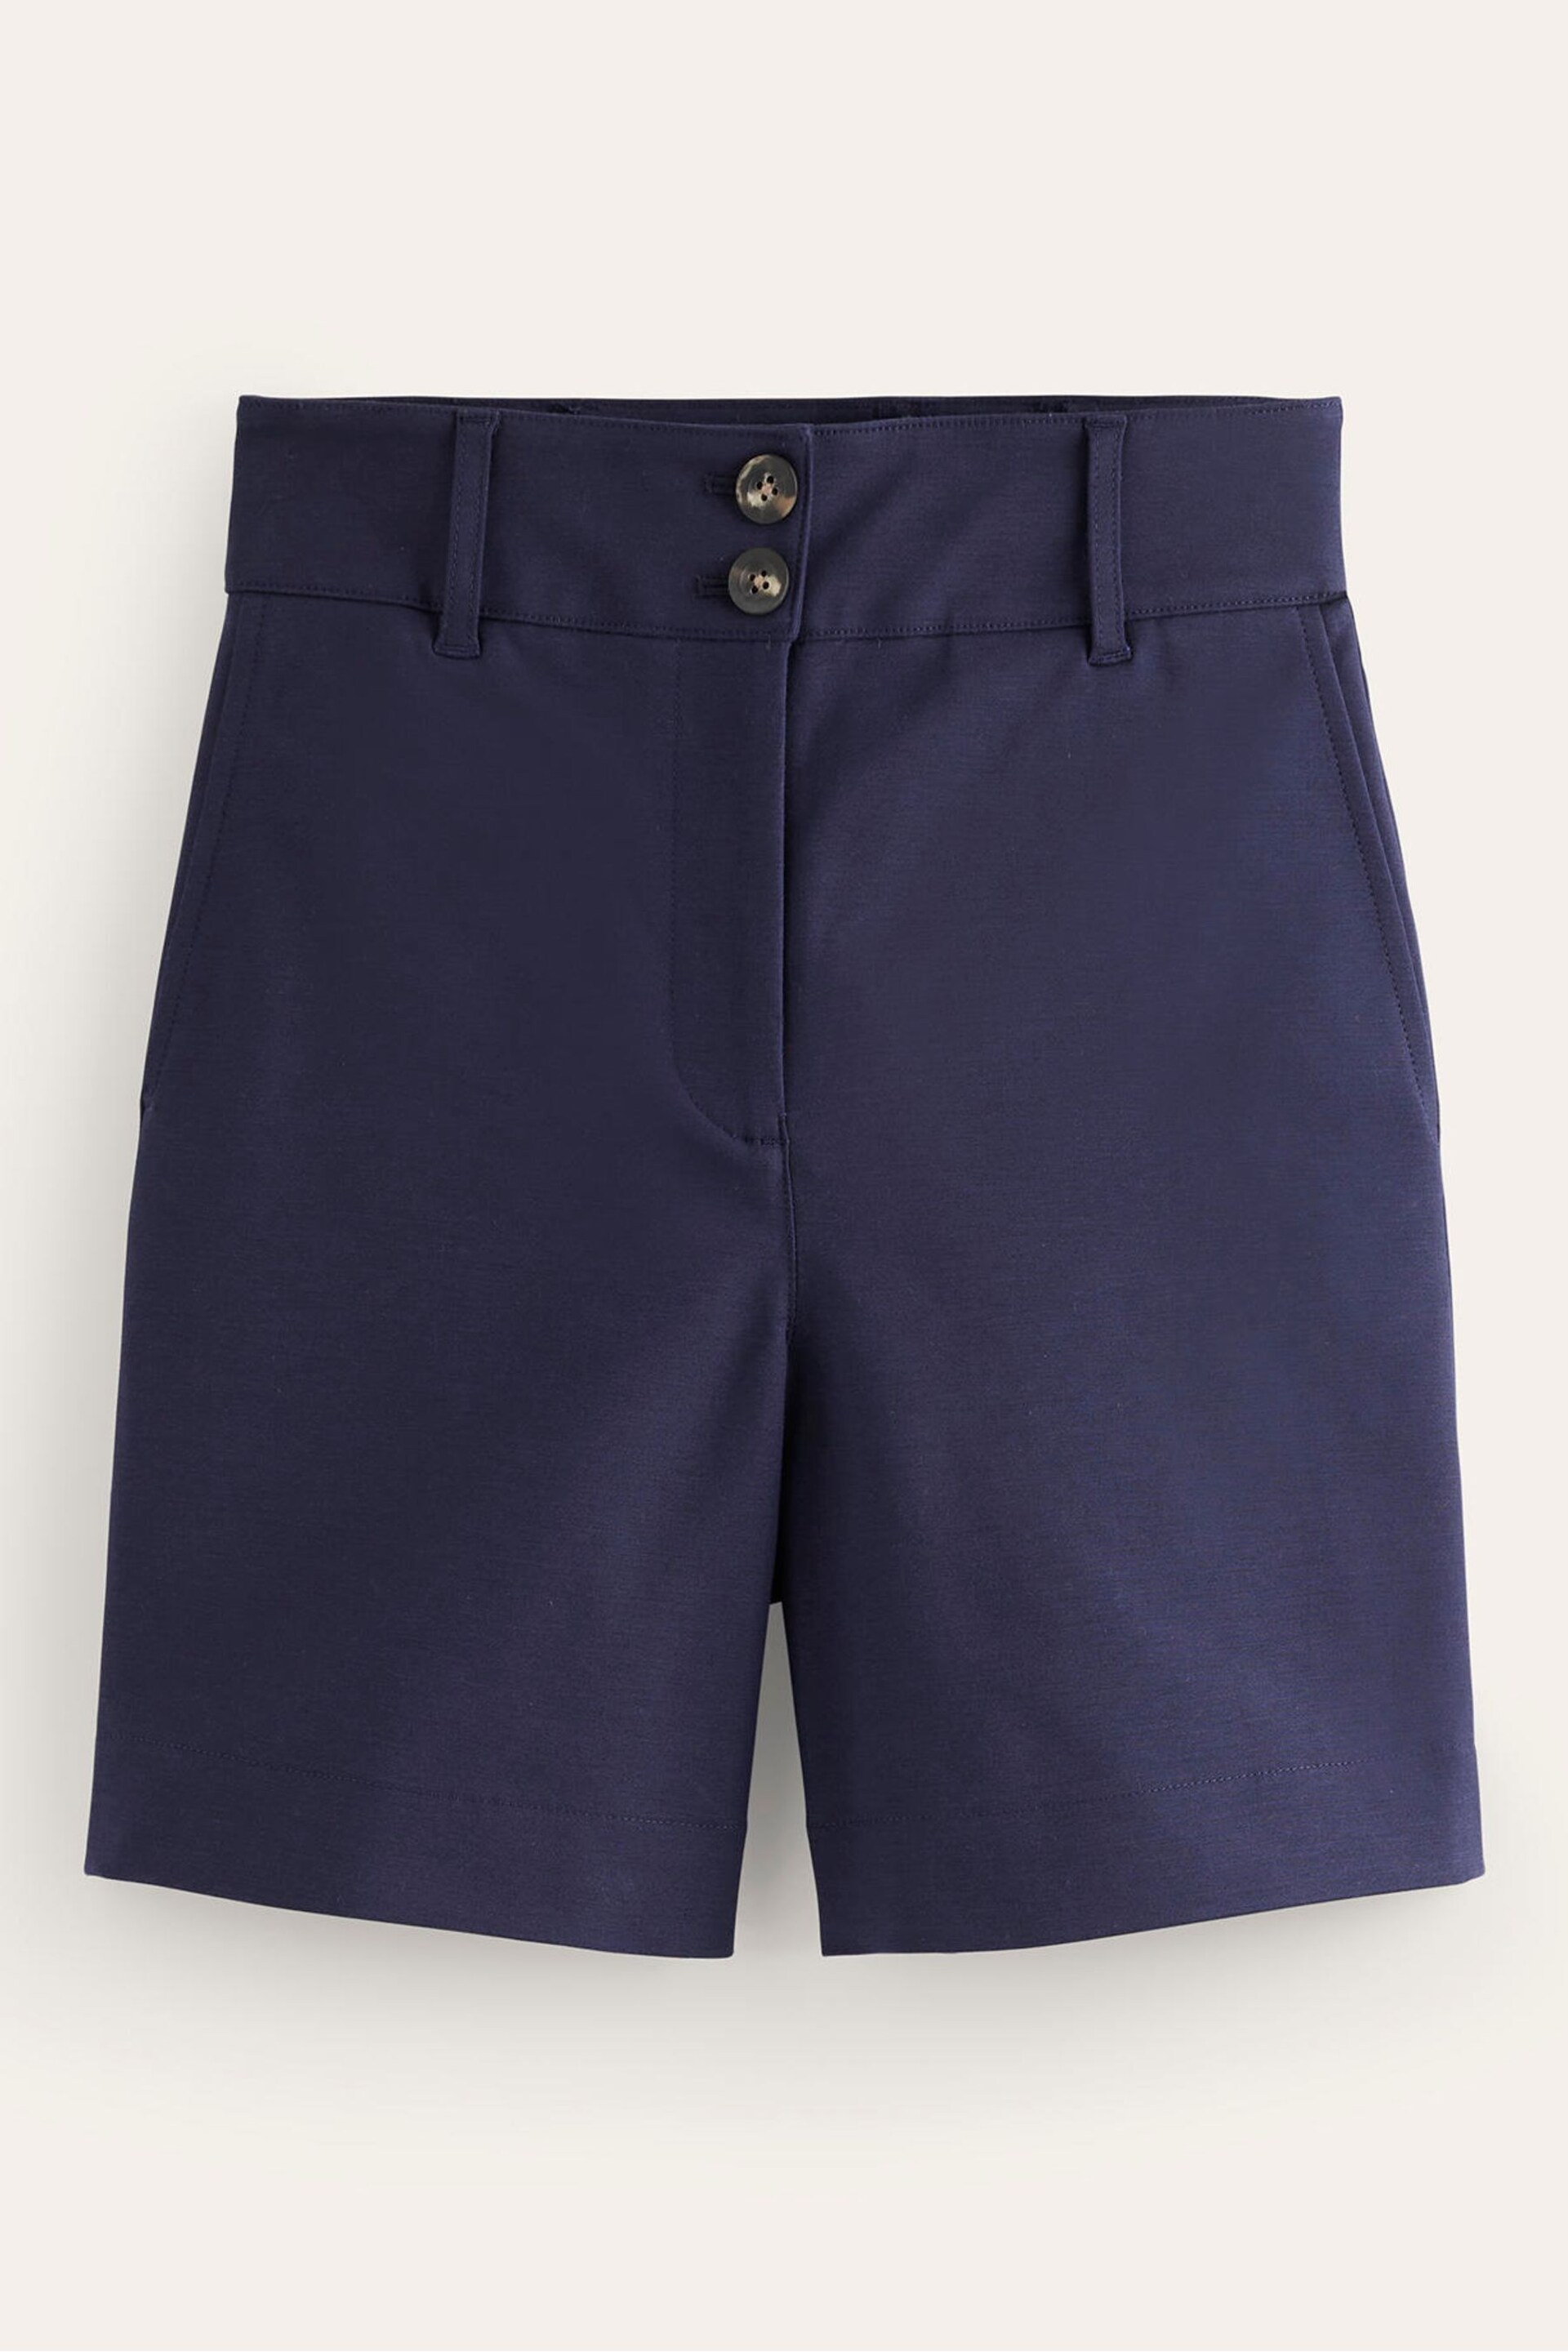 Boden Blue Petite Westbourne Linen Shorts - Image 5 of 5